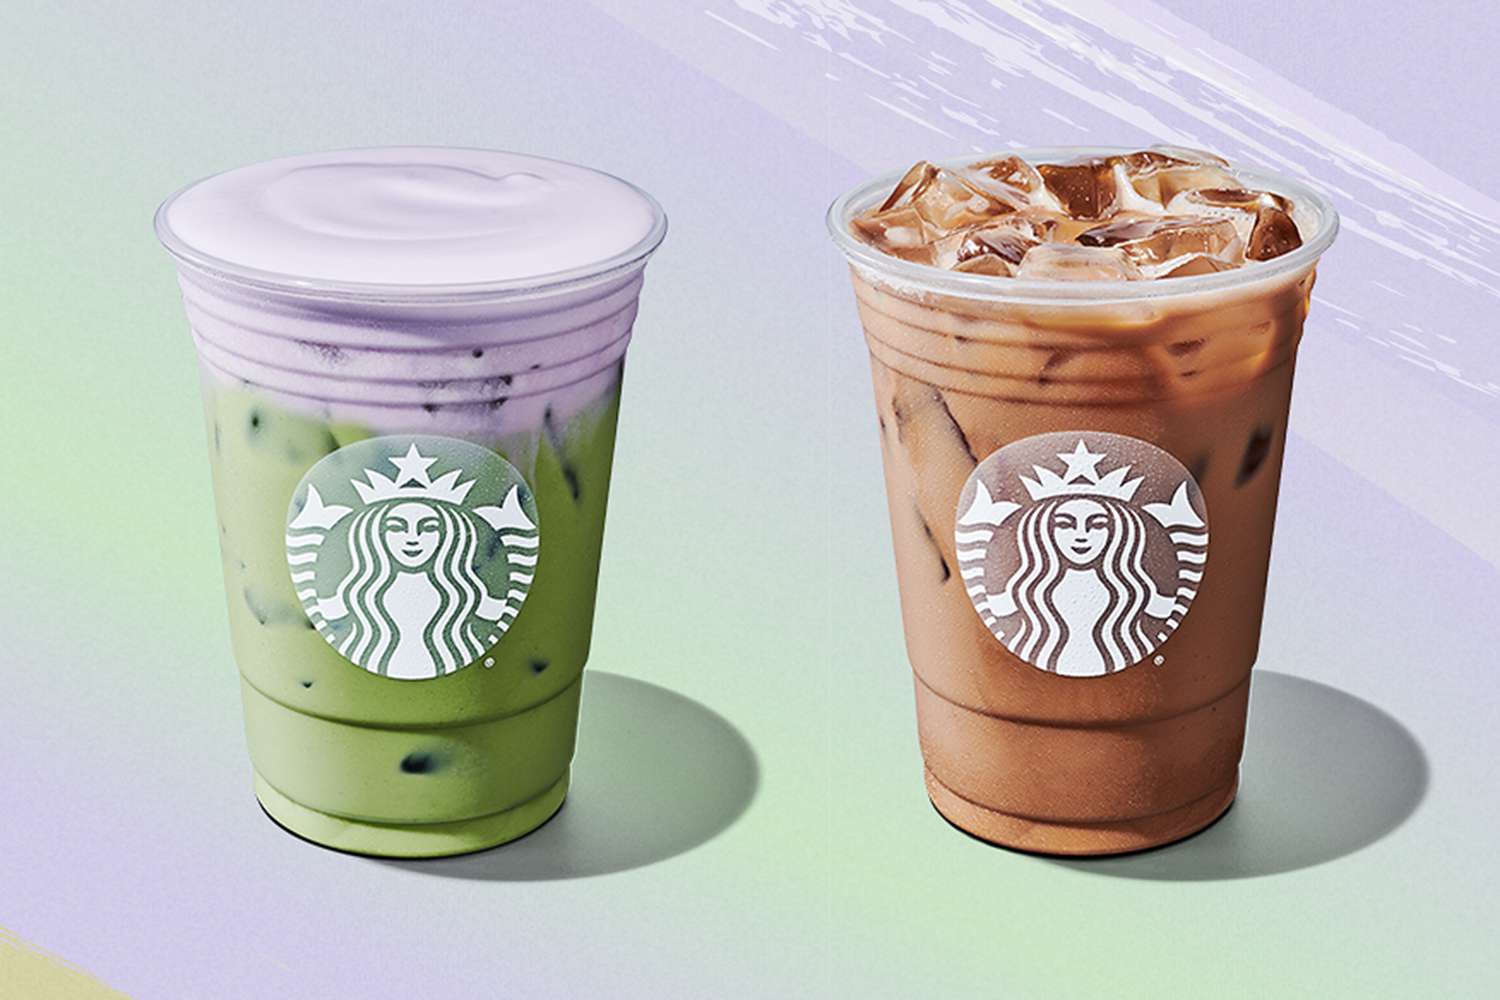 Starbucks Drinks Are Buy One Get One Free for Mother’s Day on Sunday